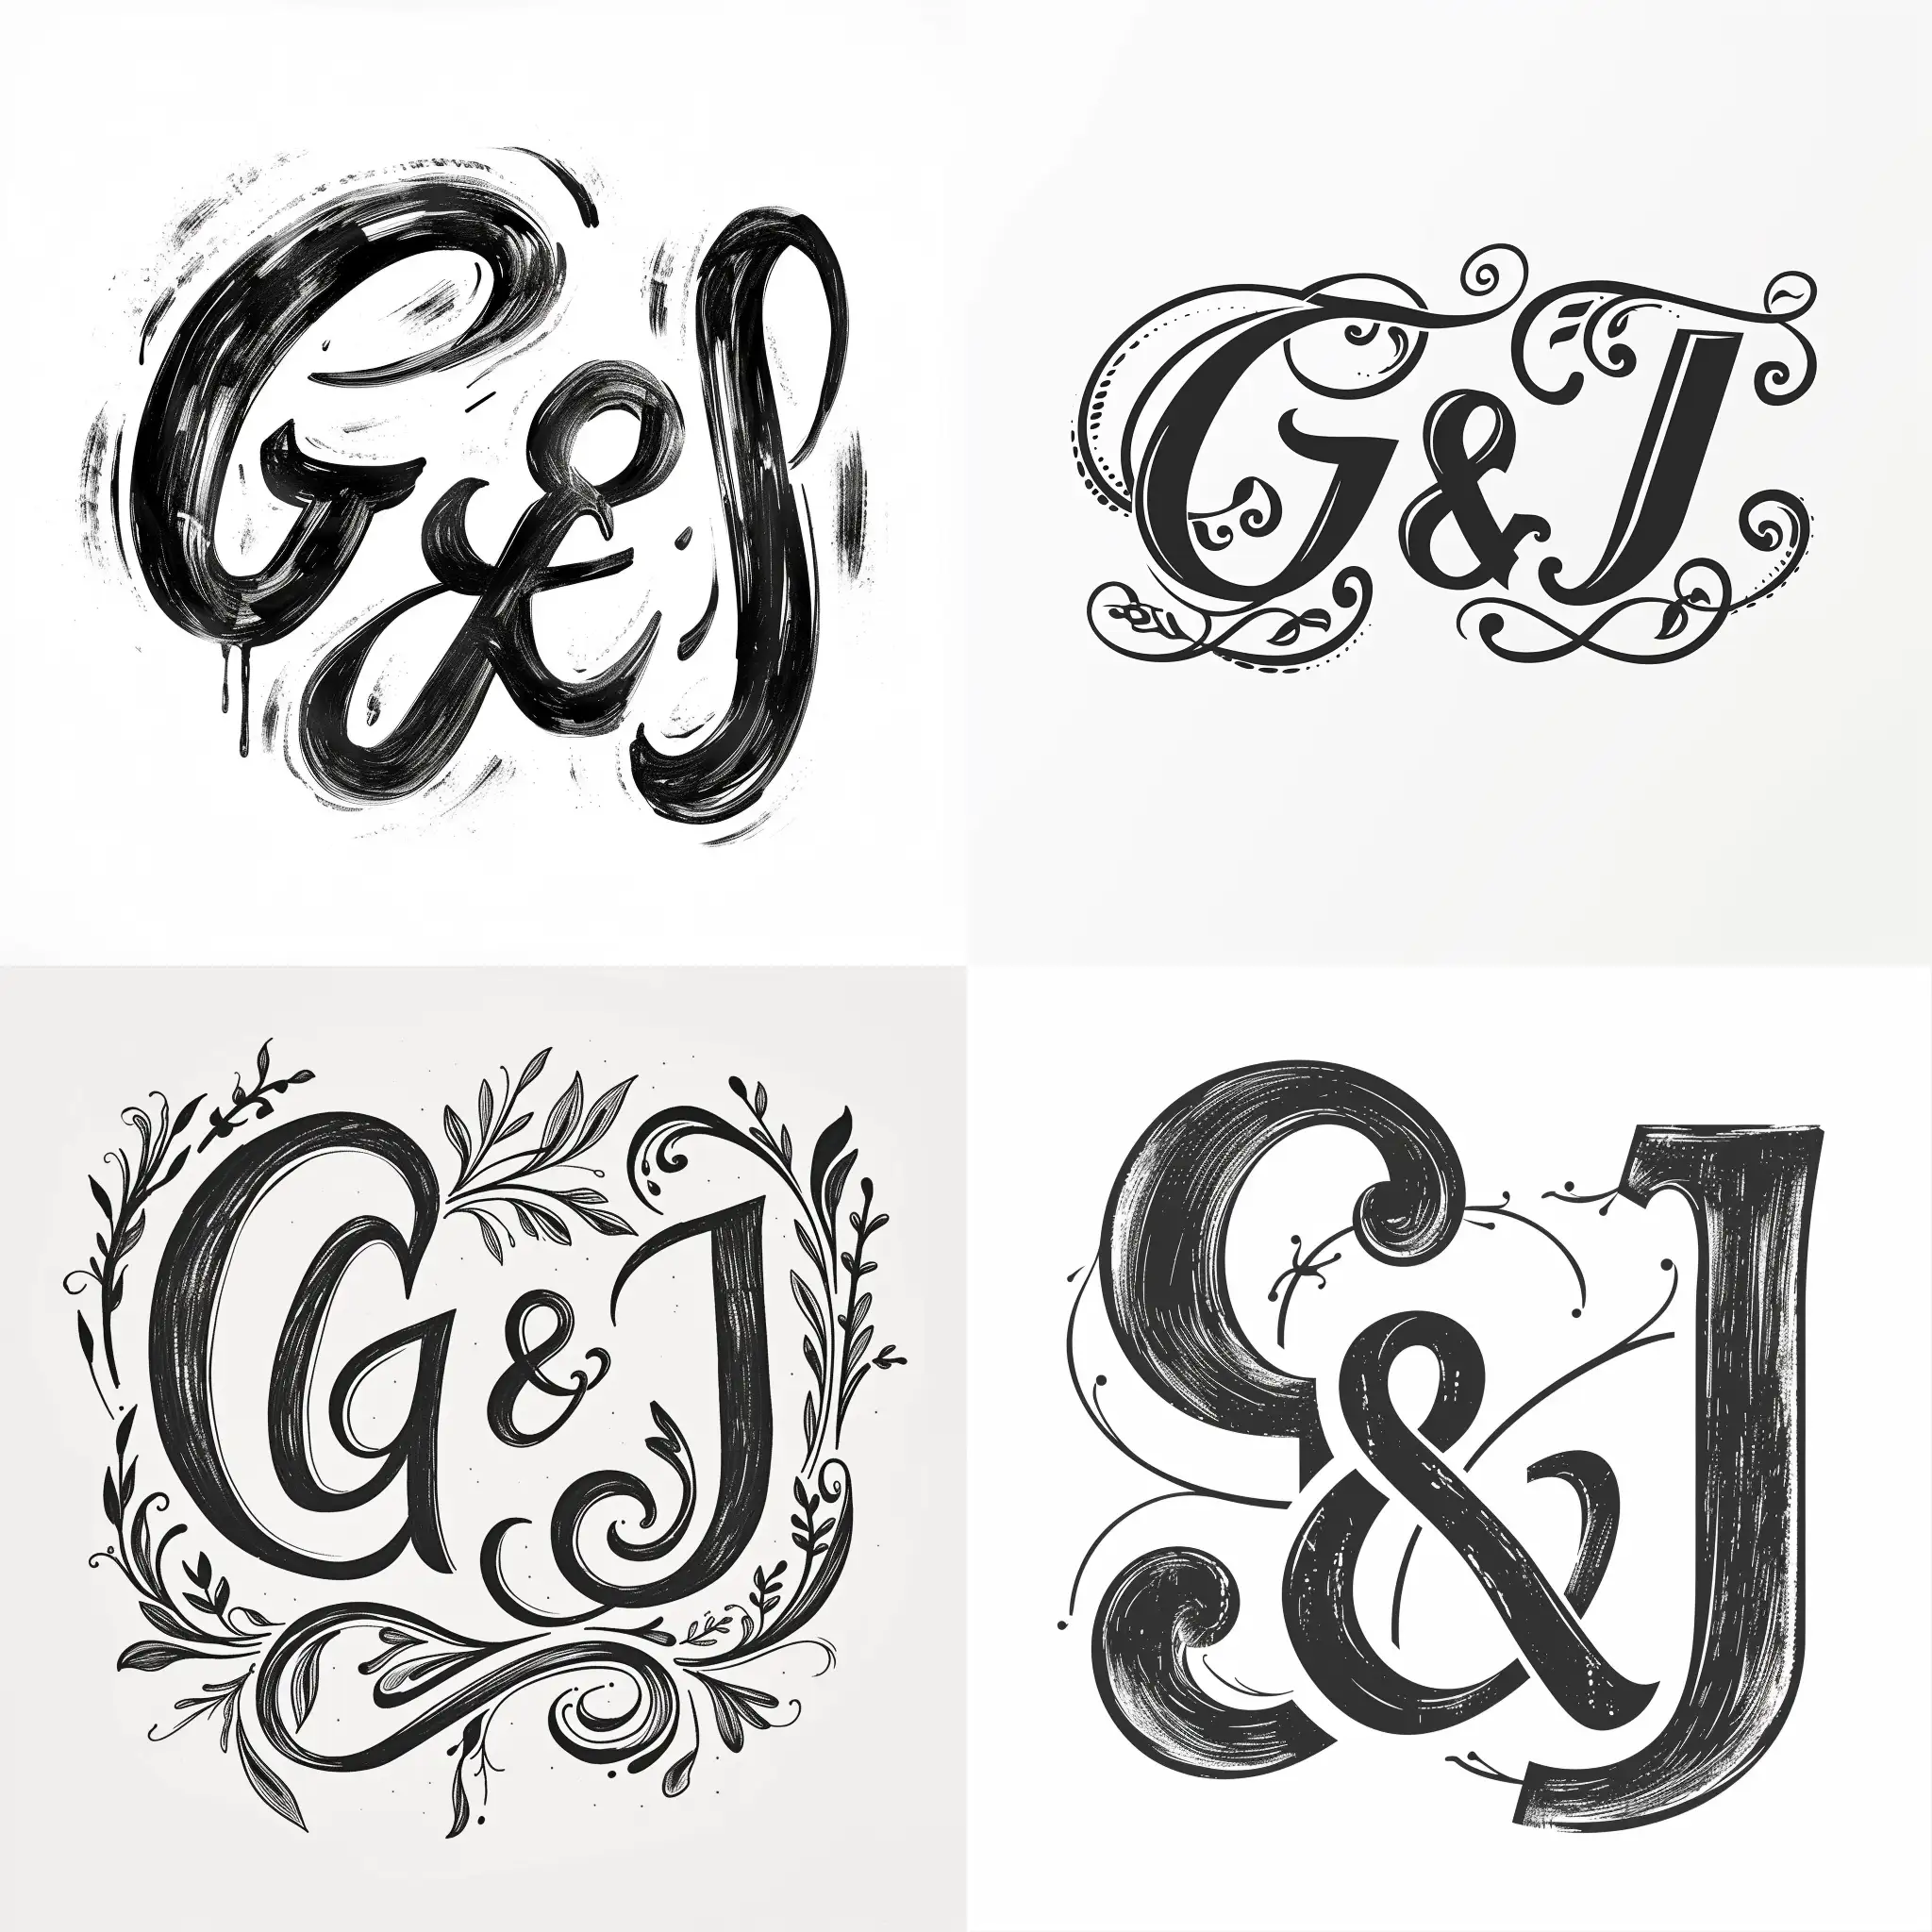 create a image for wedding logo for "G & J" in calligraphy style